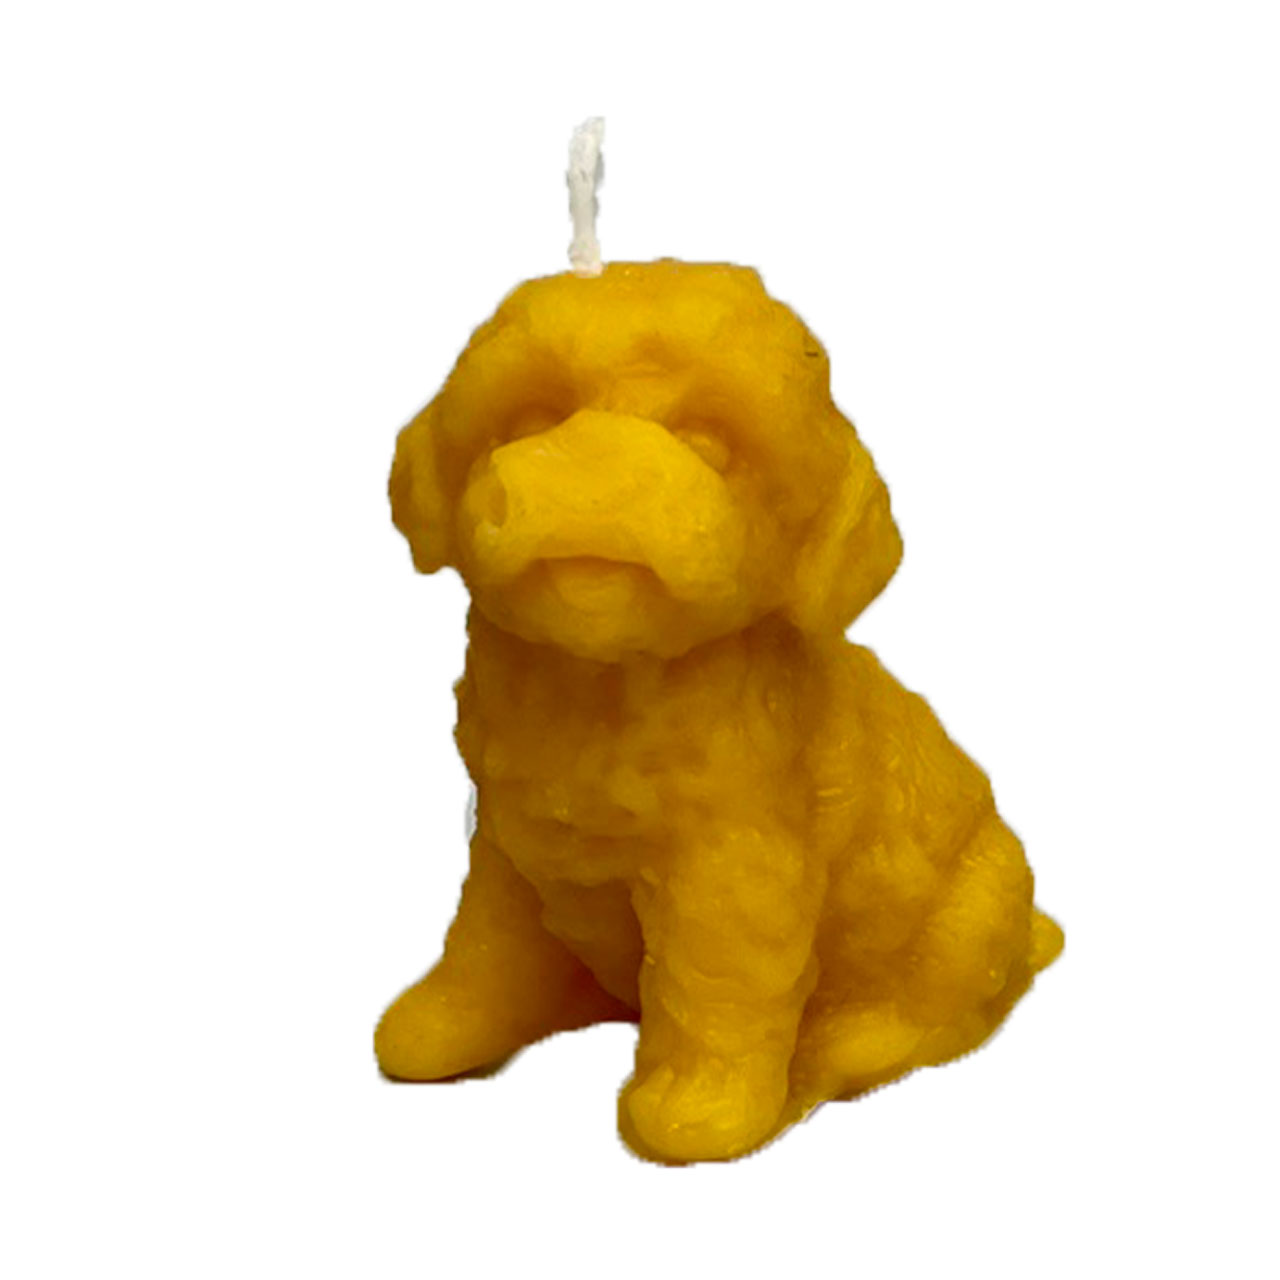 Beeswax candle "Lagotto Romagnolo", 6 cm